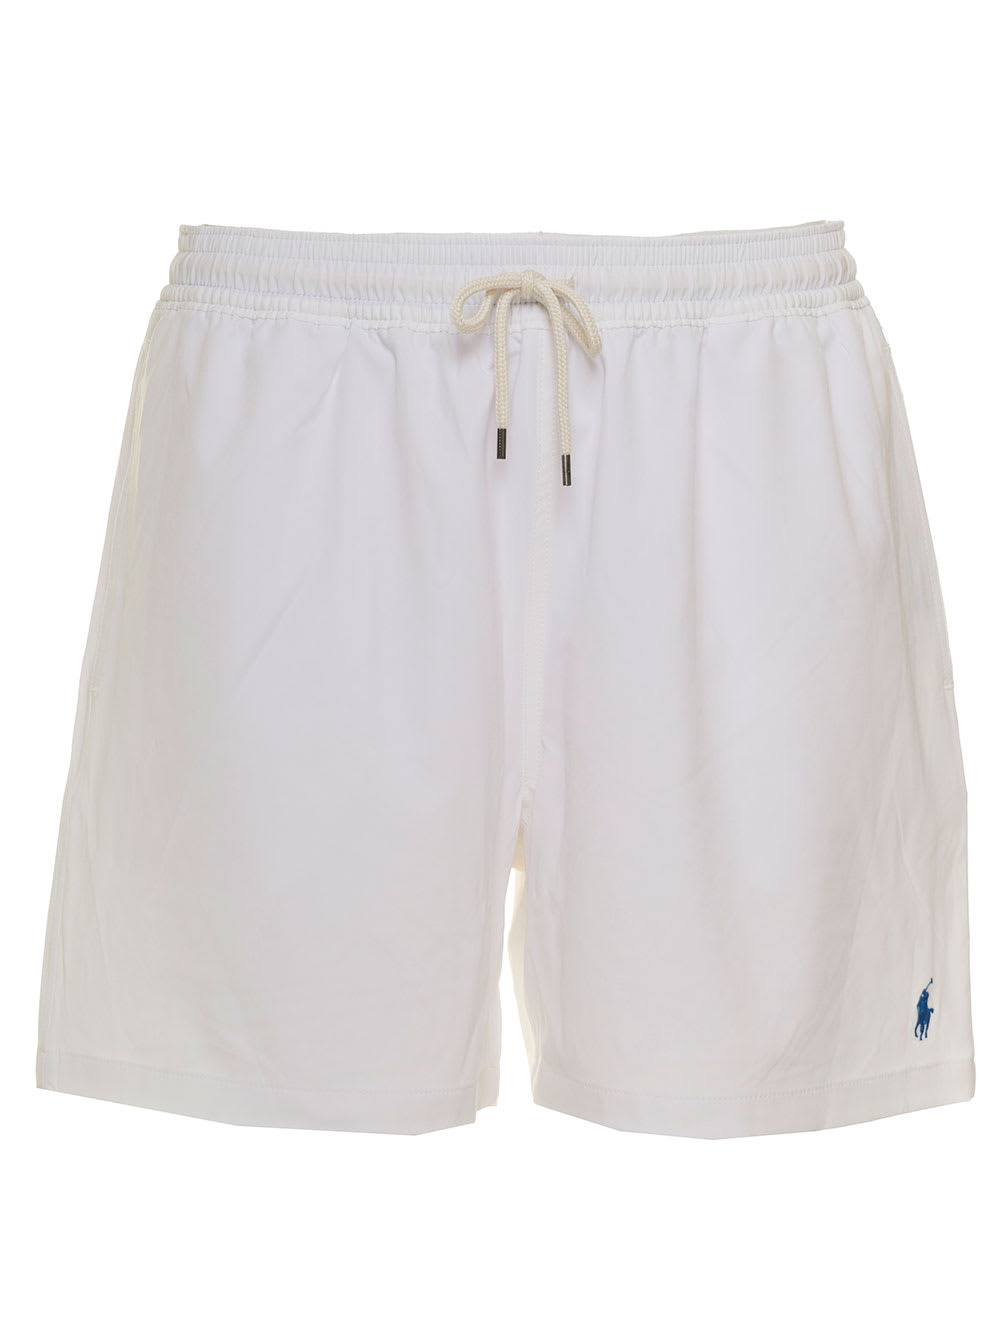 Polo Ralph Lauren Mens White Recycled Fabric Shorts